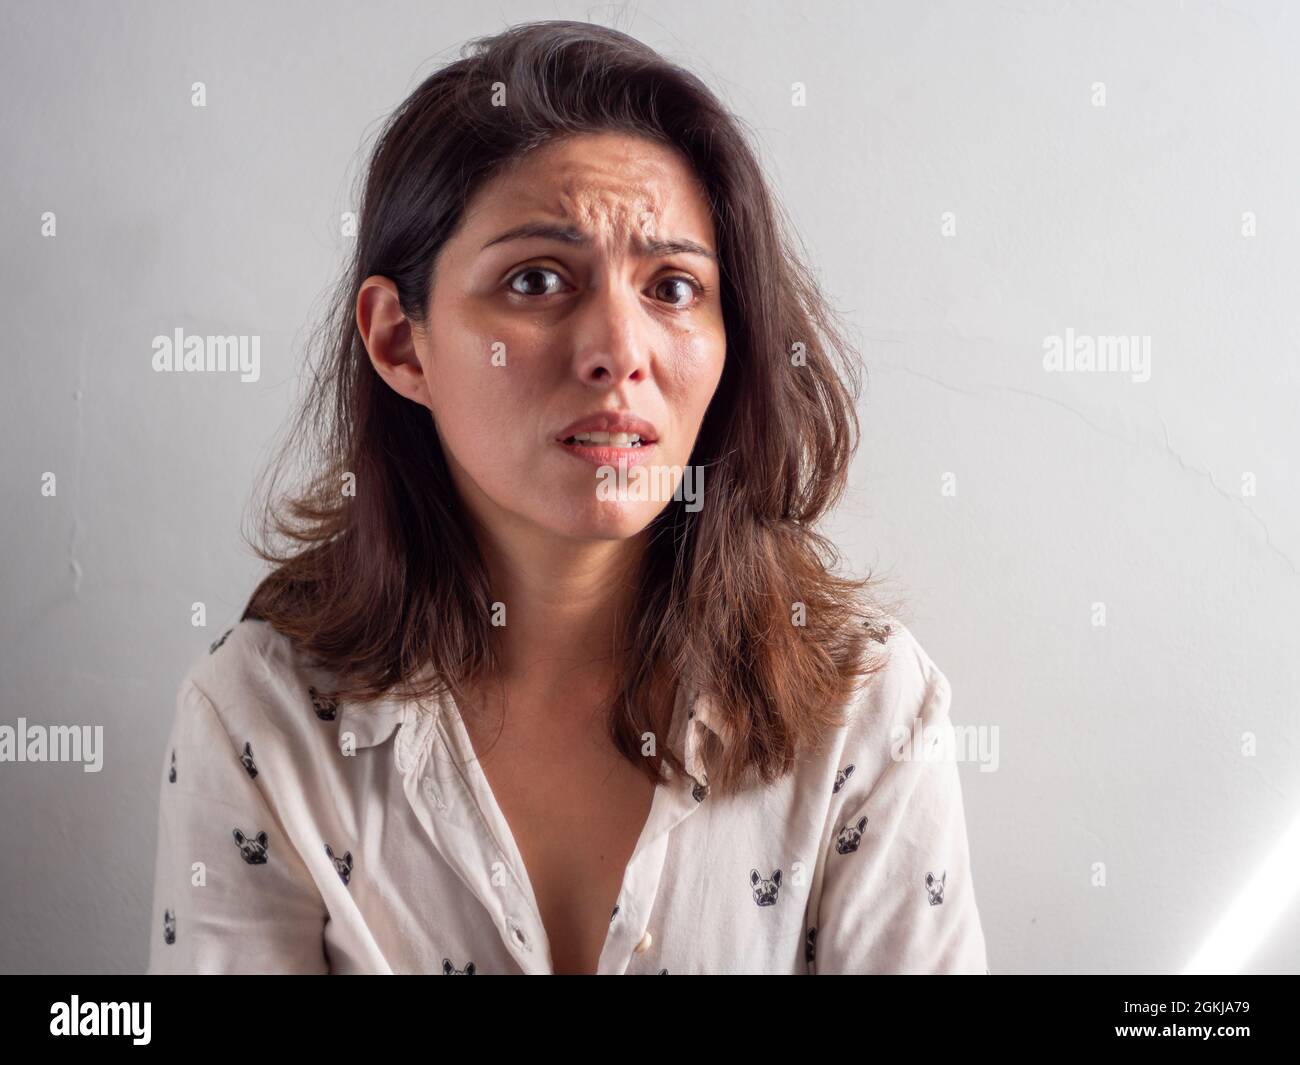 Young Handsome Brown Hair Peruvian Woman Looks Stressed and Affraid Stock Photo